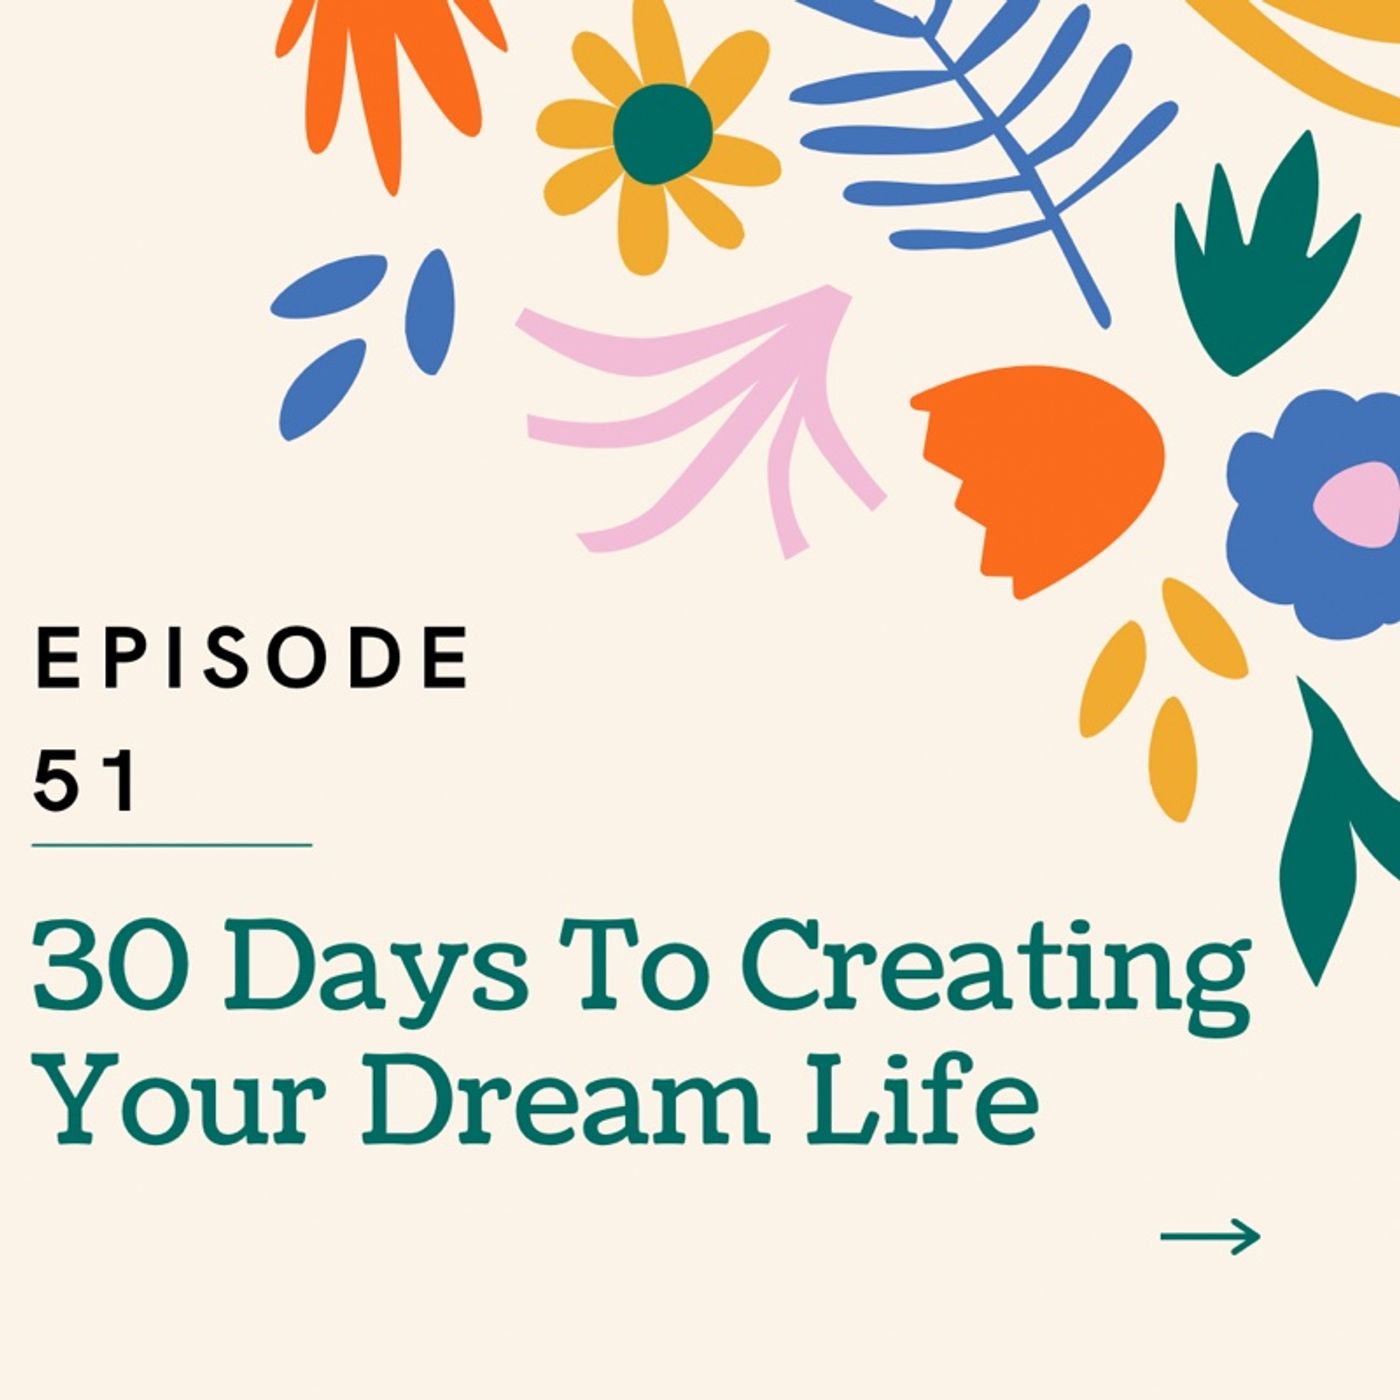 Episode 51 - 30 Days To Creating Your Dream Life